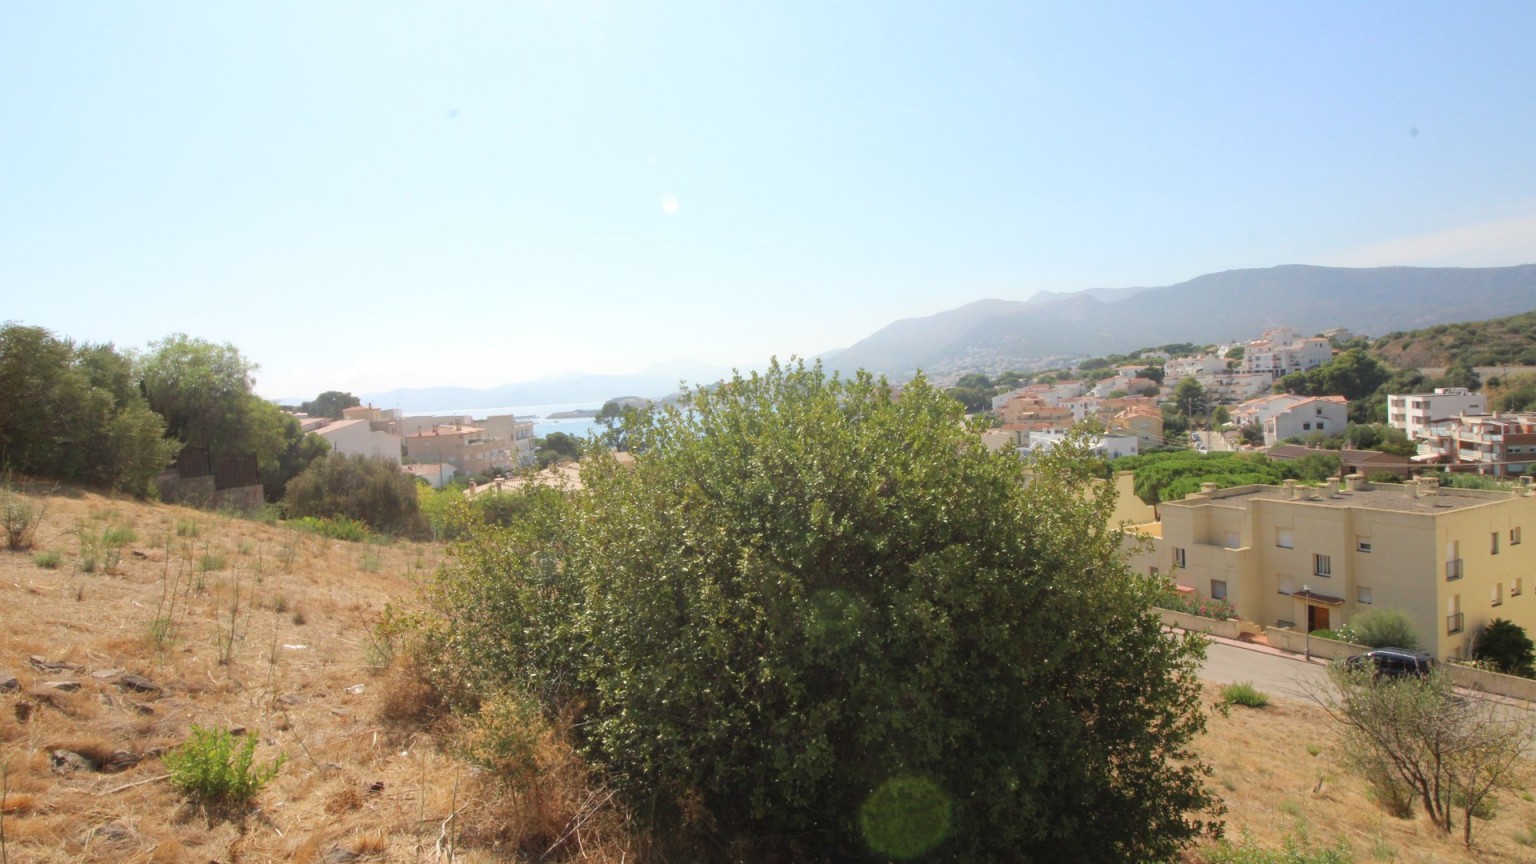 Plot of land for sale in Grifeu area